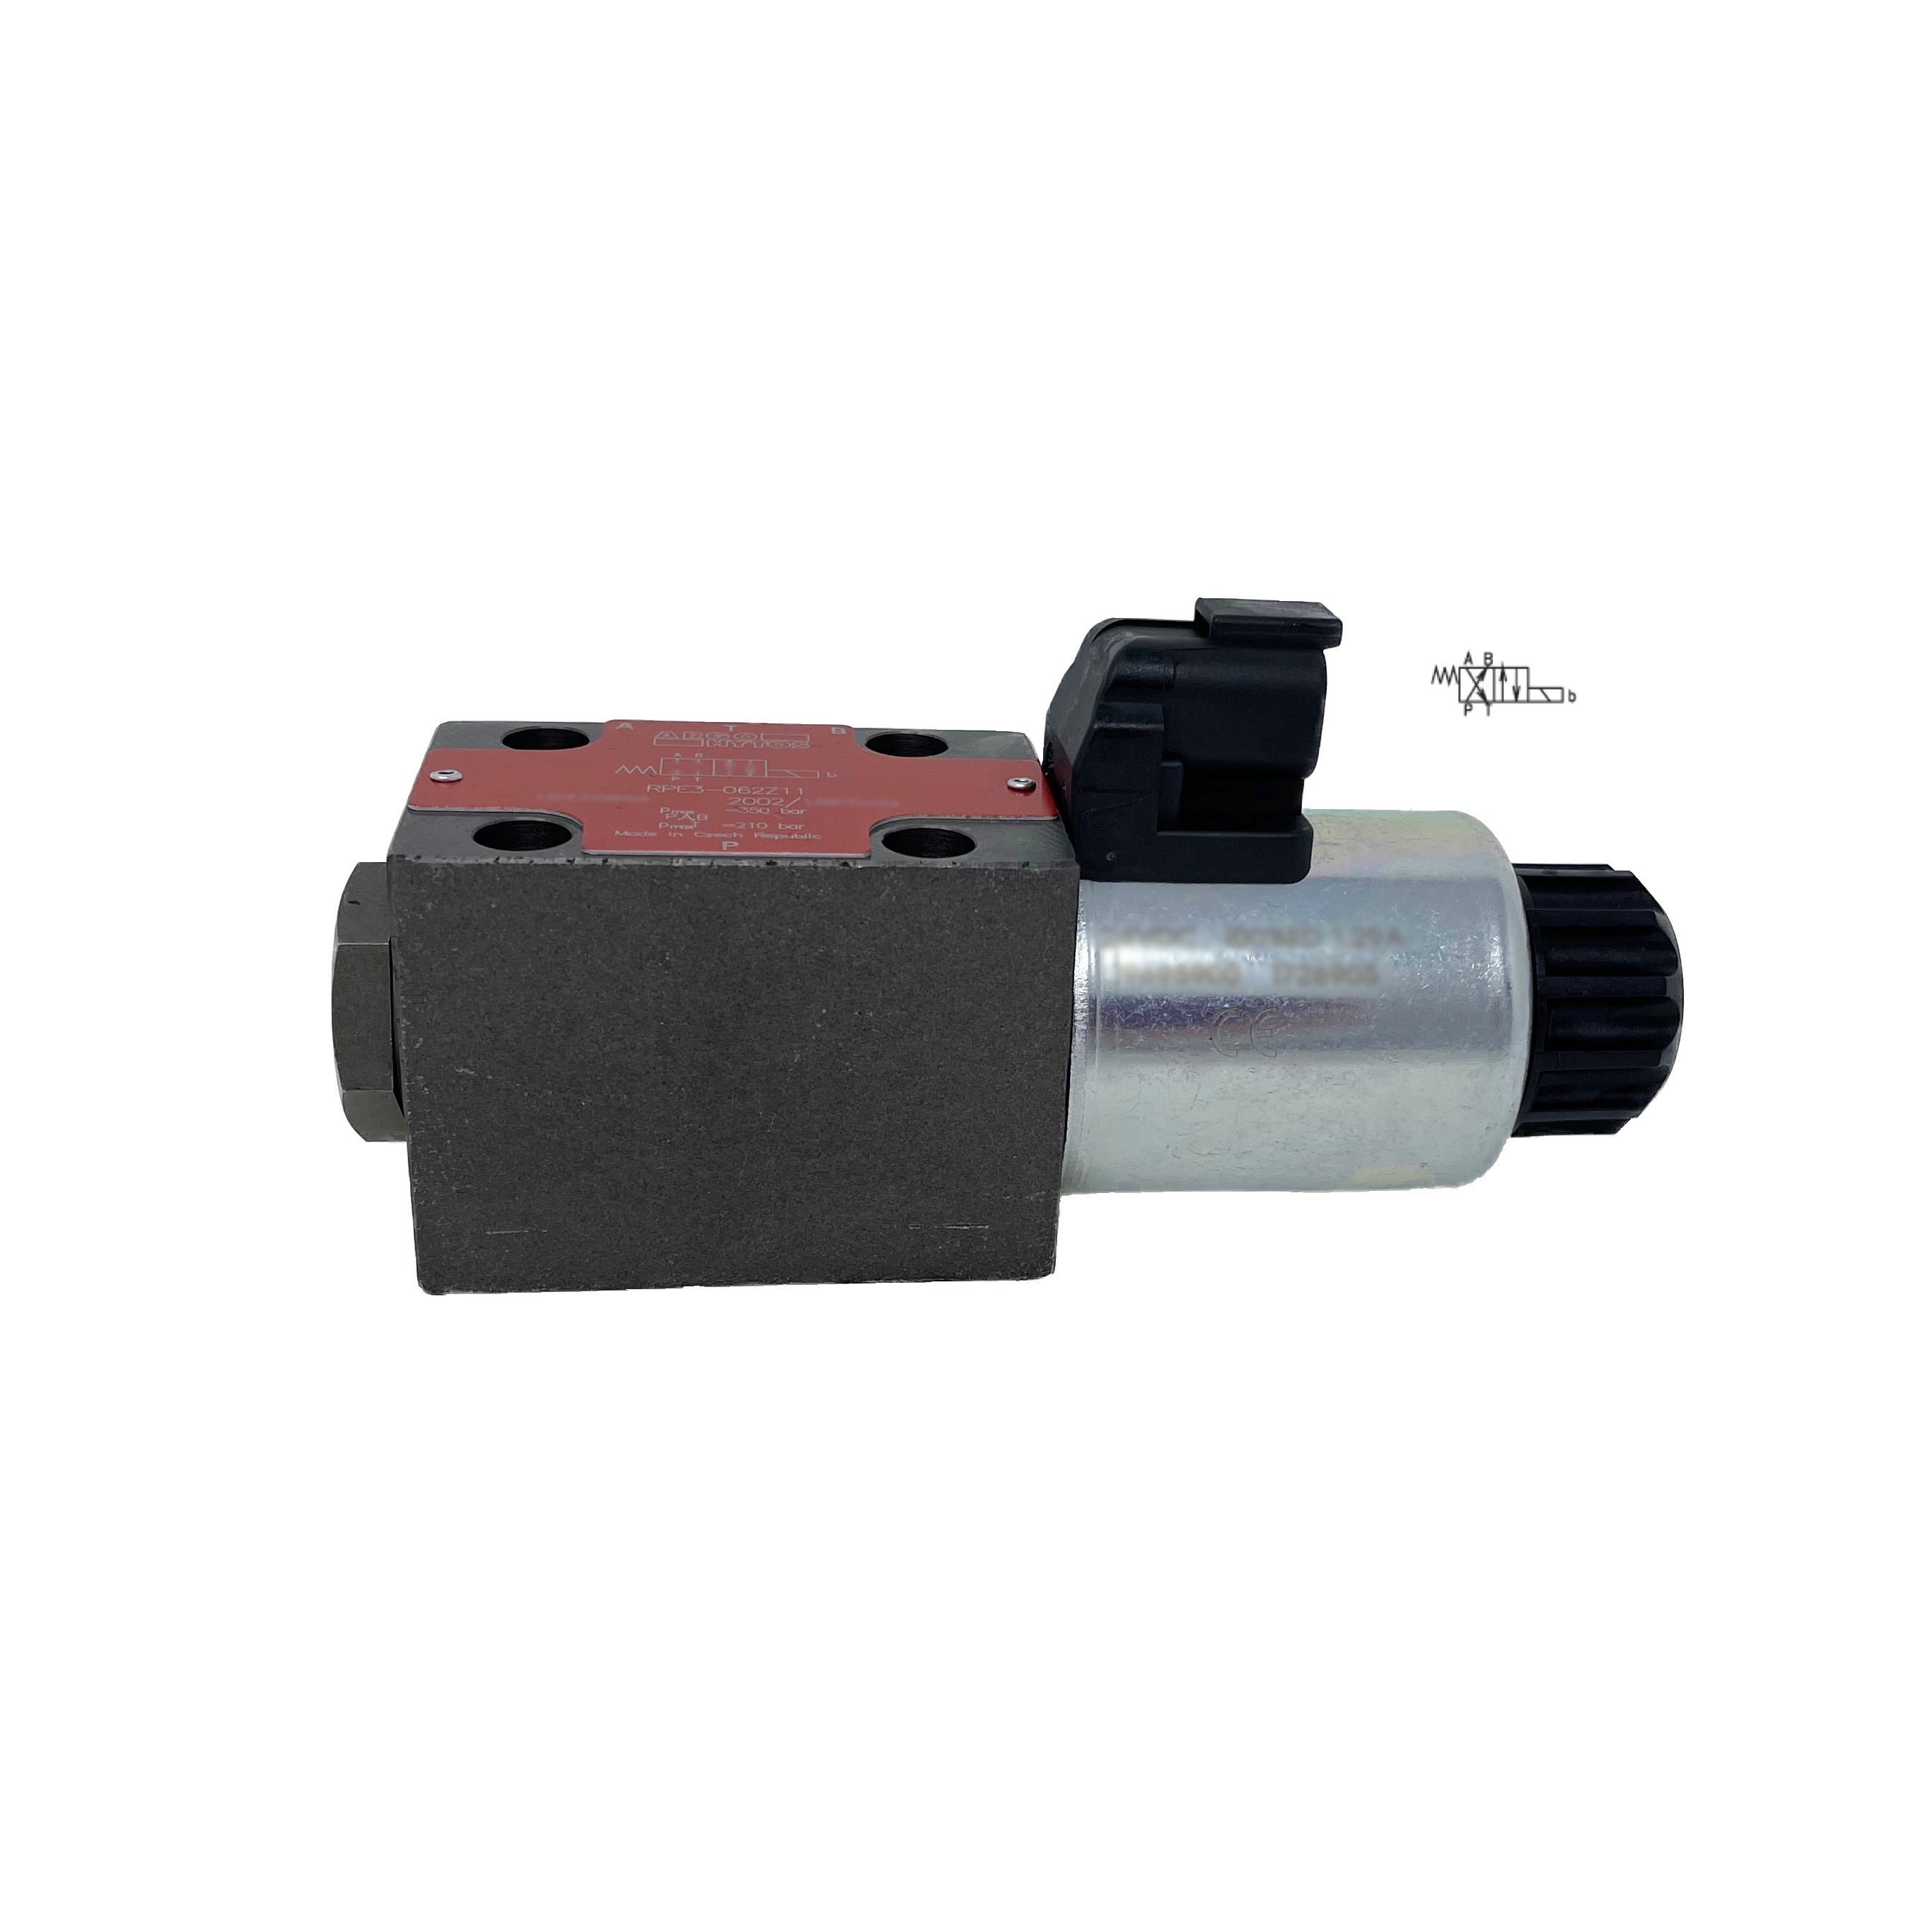 RPE3-062X11/02400E12A : Argo Hytos Directional Control Valve, D03 (NG6), 21GPM, 5100psi, 2P4W, 24 VDC, Deutsch, Spring Return, P to B, A to T in Neutral, Coil Side B